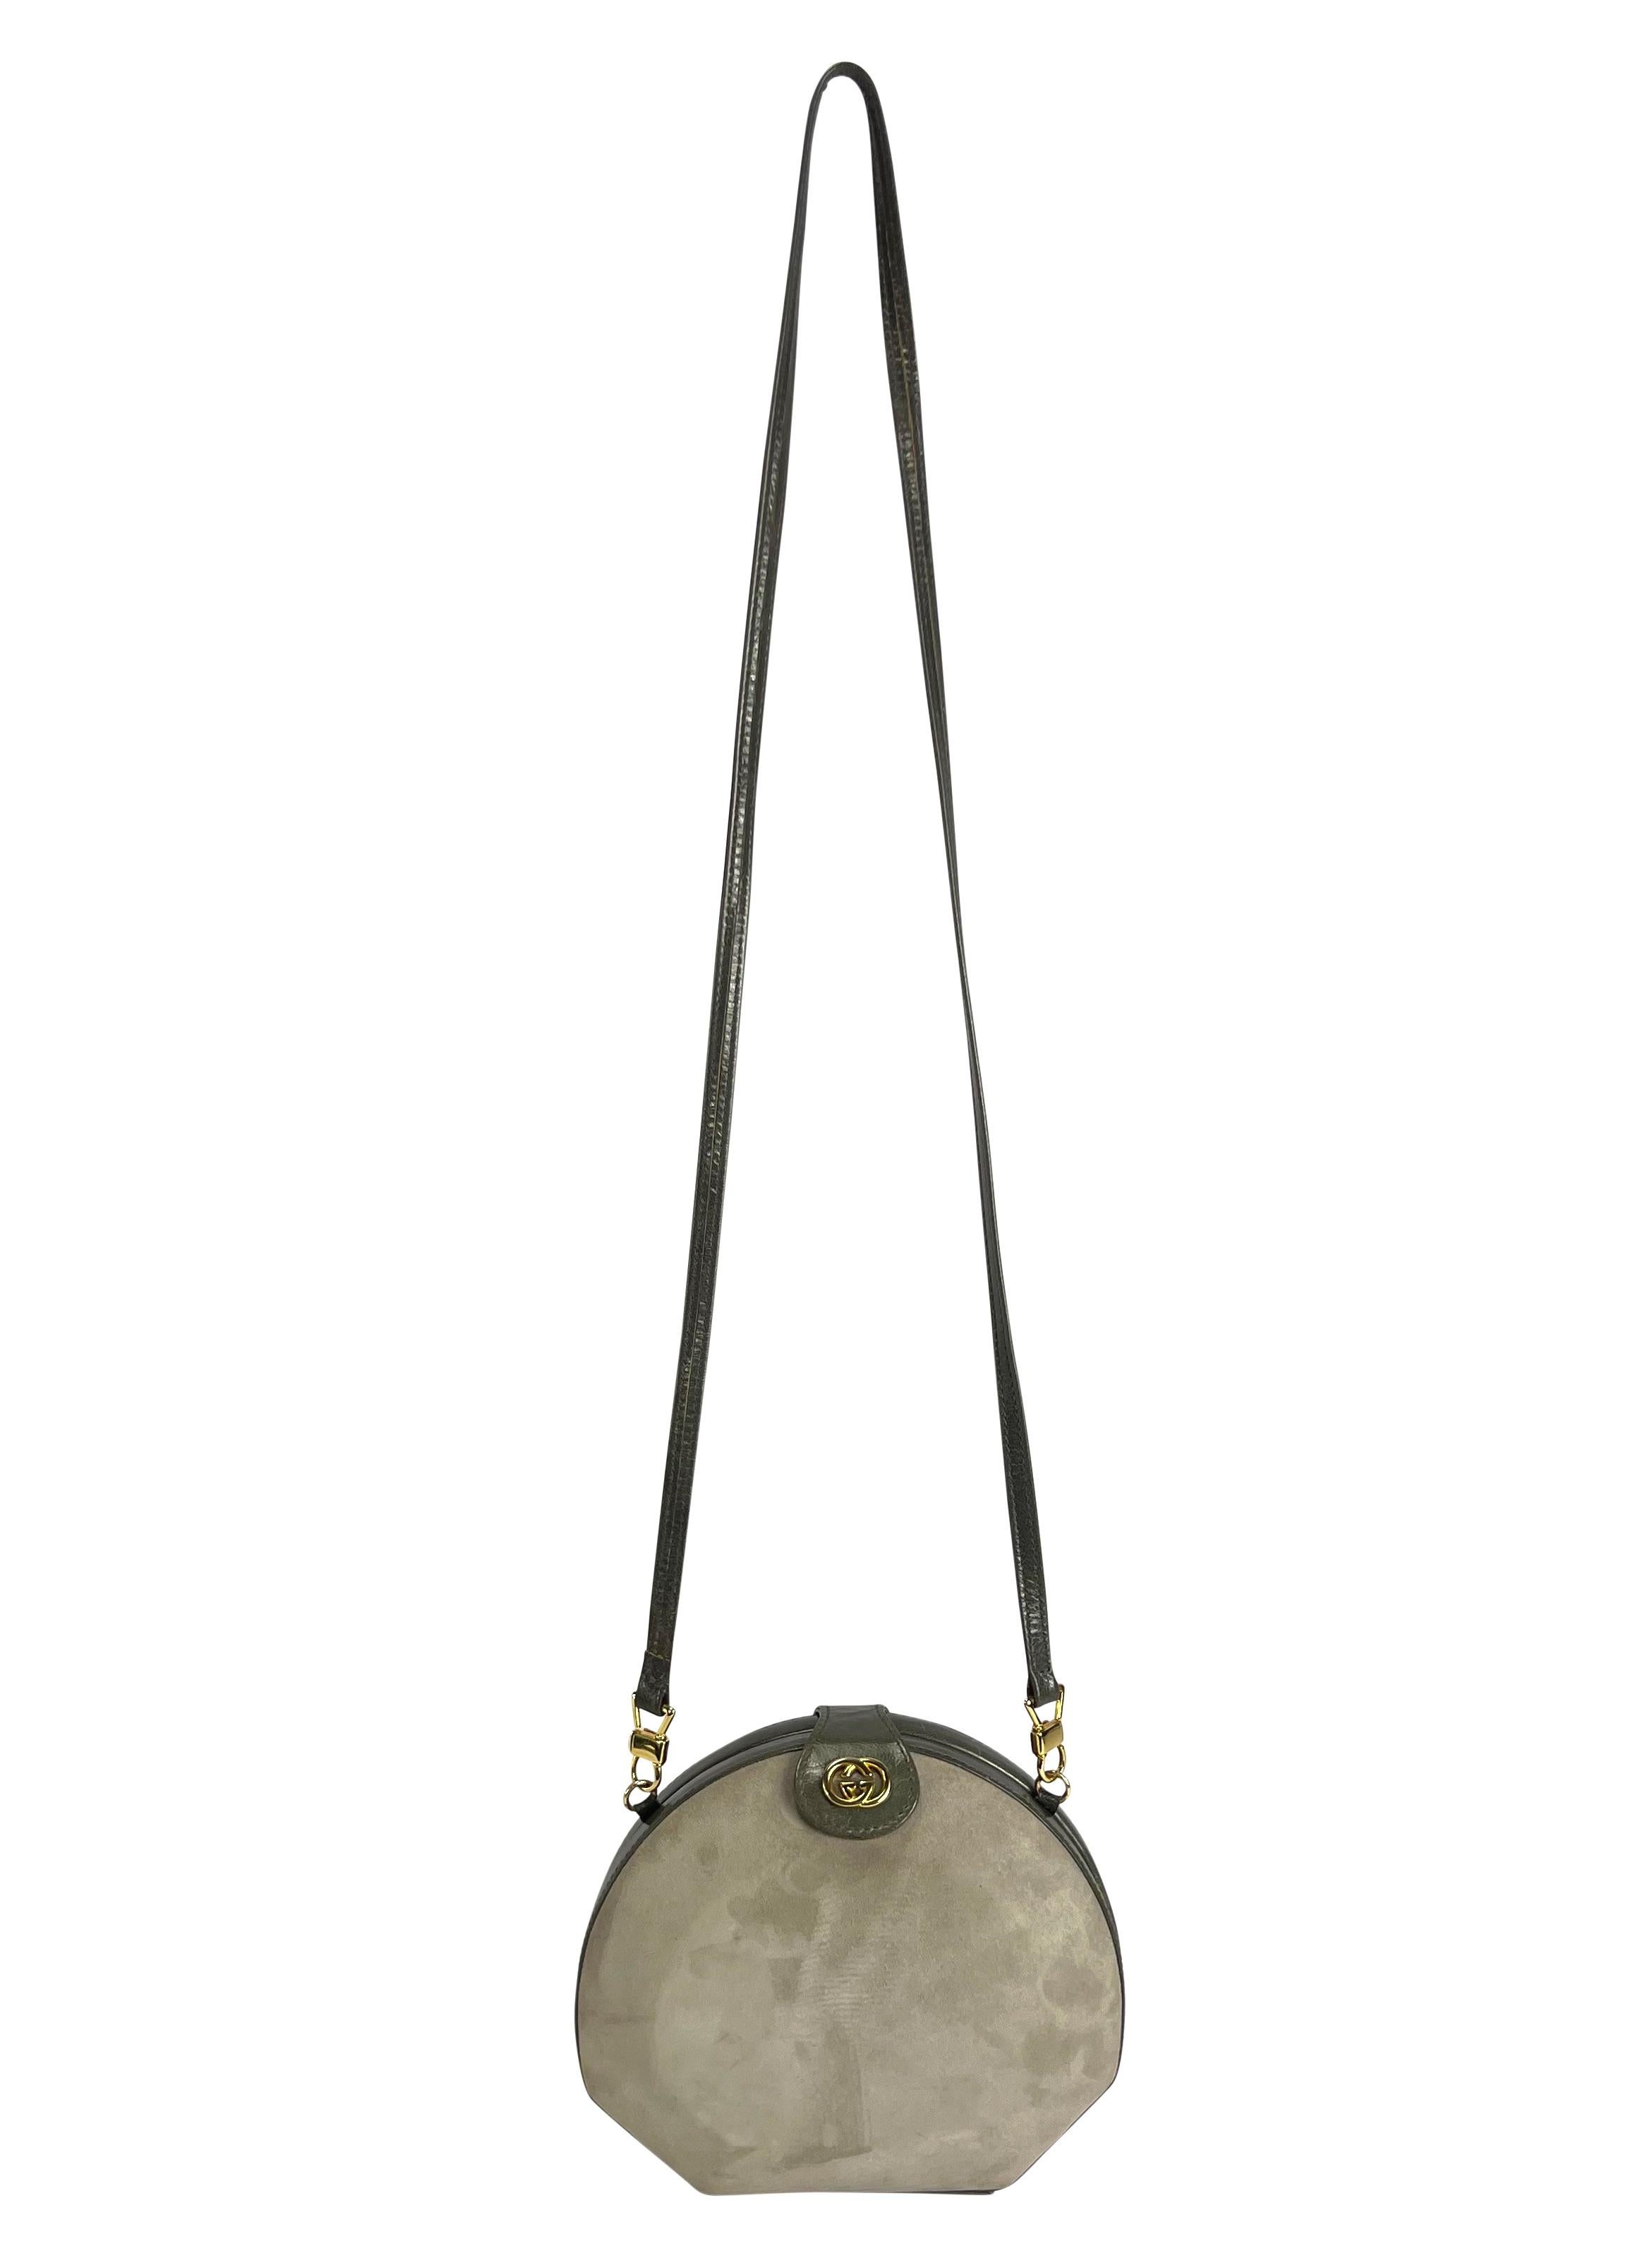 Presenting a fabulous grey suede hardshell Gucci convertible crossbody bag. From the 1980s, this clam shell style bag is constructed in a light grey suede contrasted with a darker grey leather at the closure, strap, and flap. The crossbody strap can